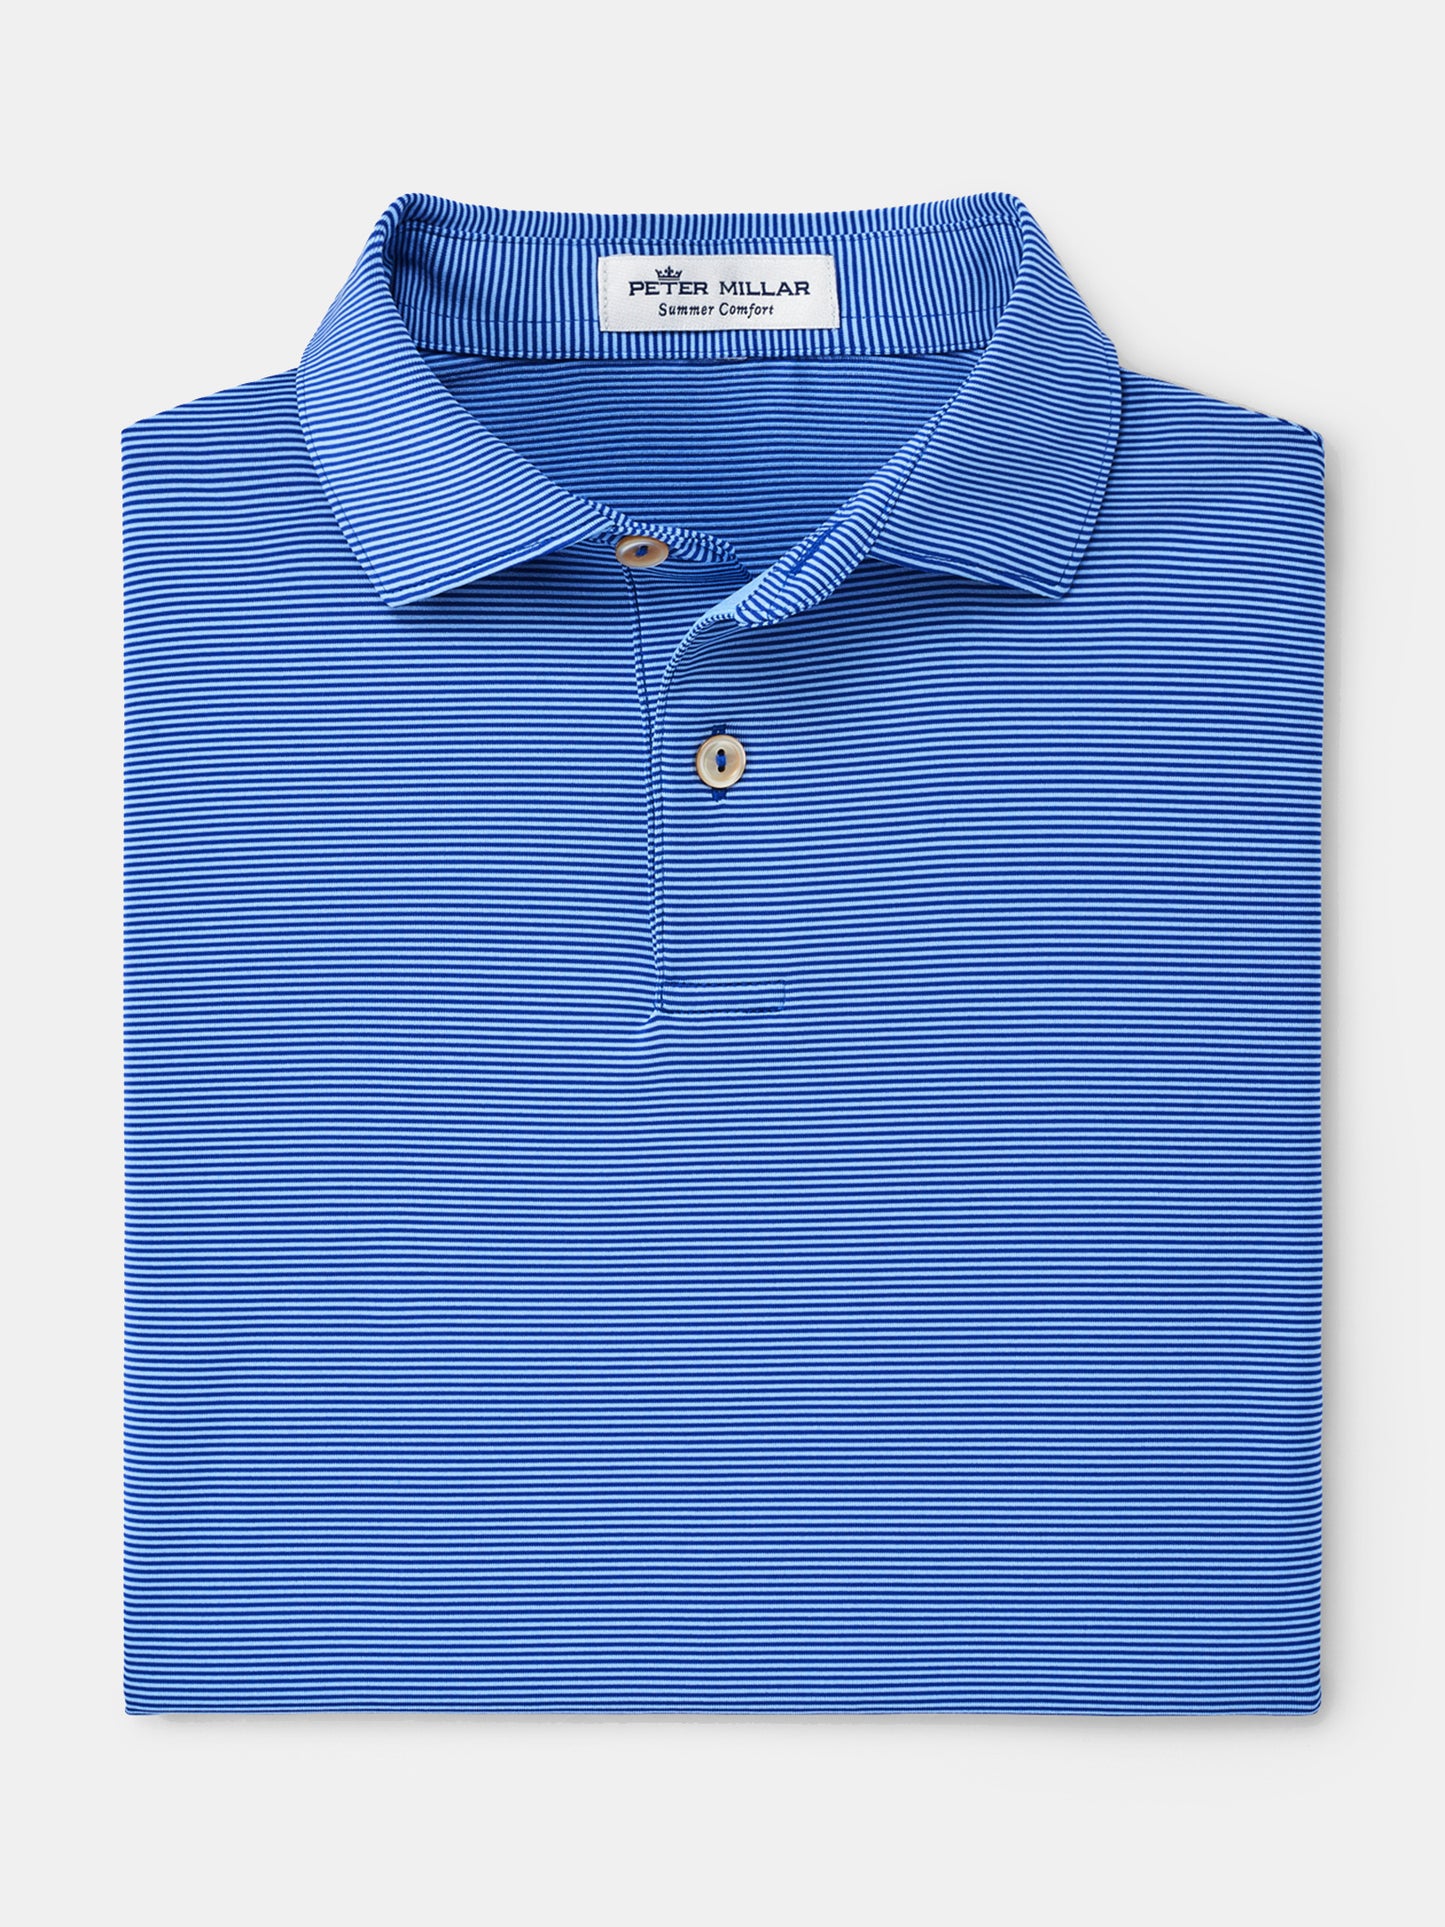 Peter Millar Youth Collection Boys' Jubilee Performance Polo